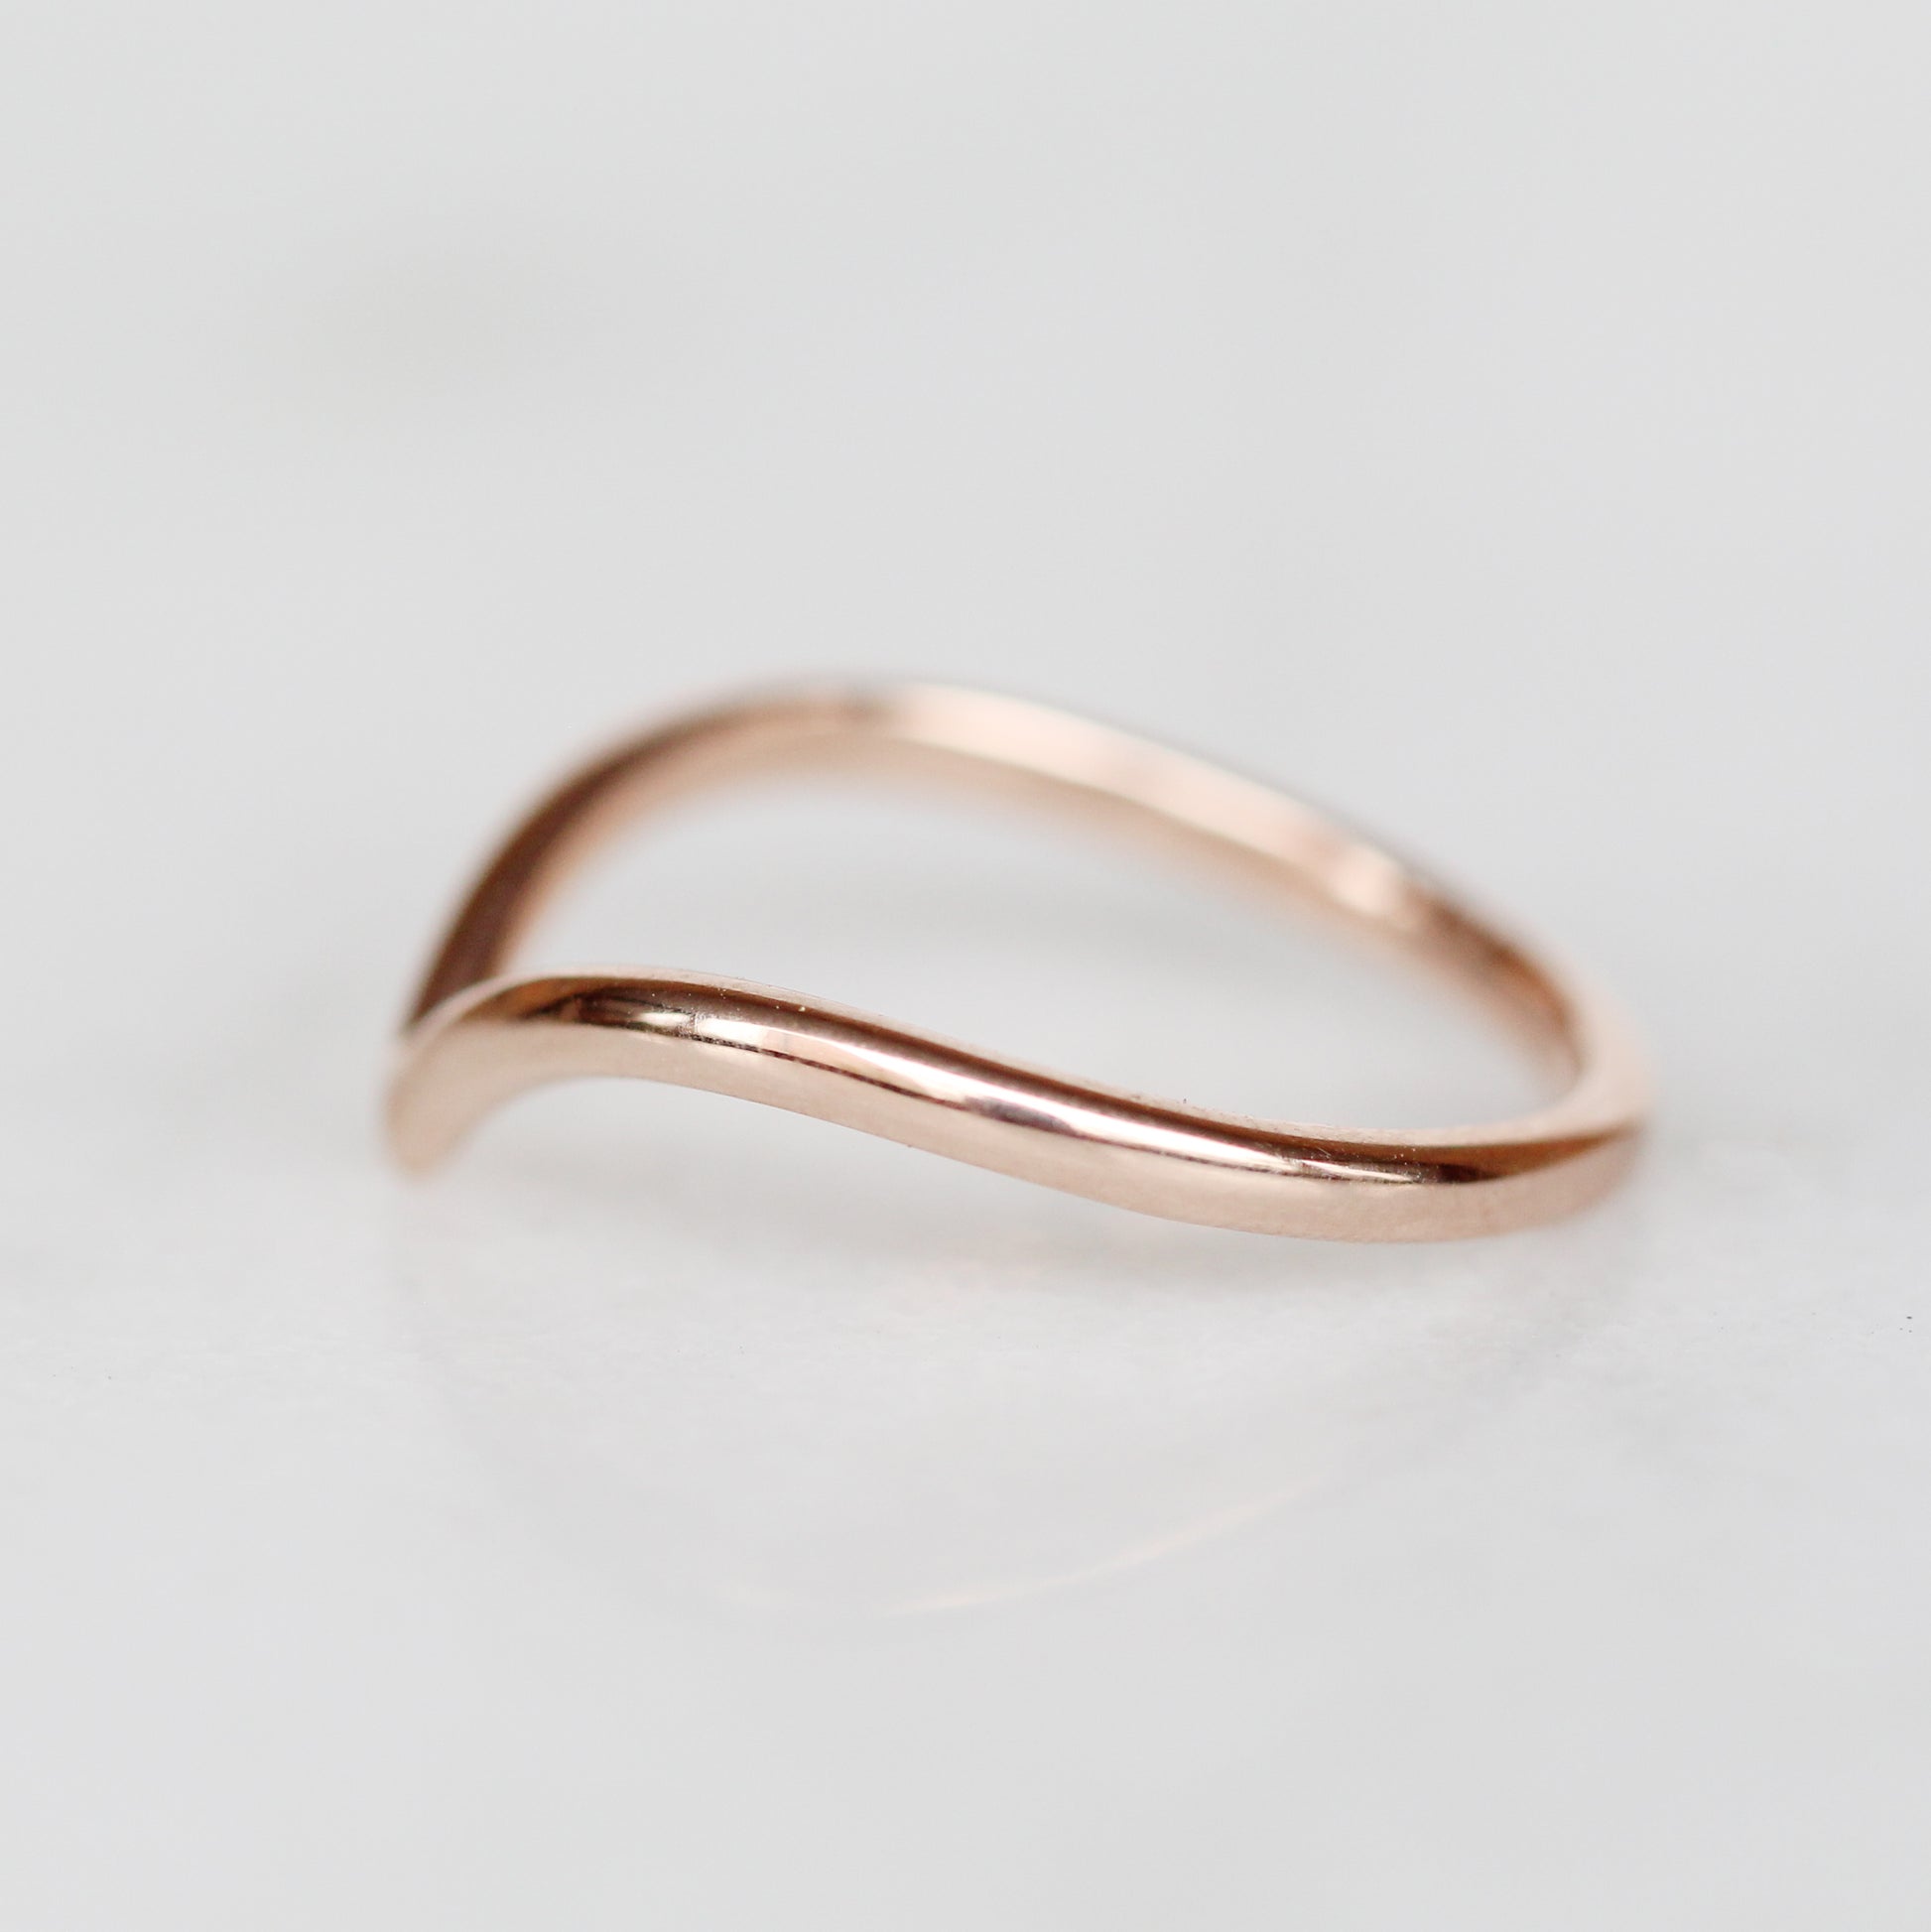 Vera wedding band - contour point V shape band - 14k gold of choice - Midwinter Co. Alternative Bridal Rings and Modern Fine Jewelry